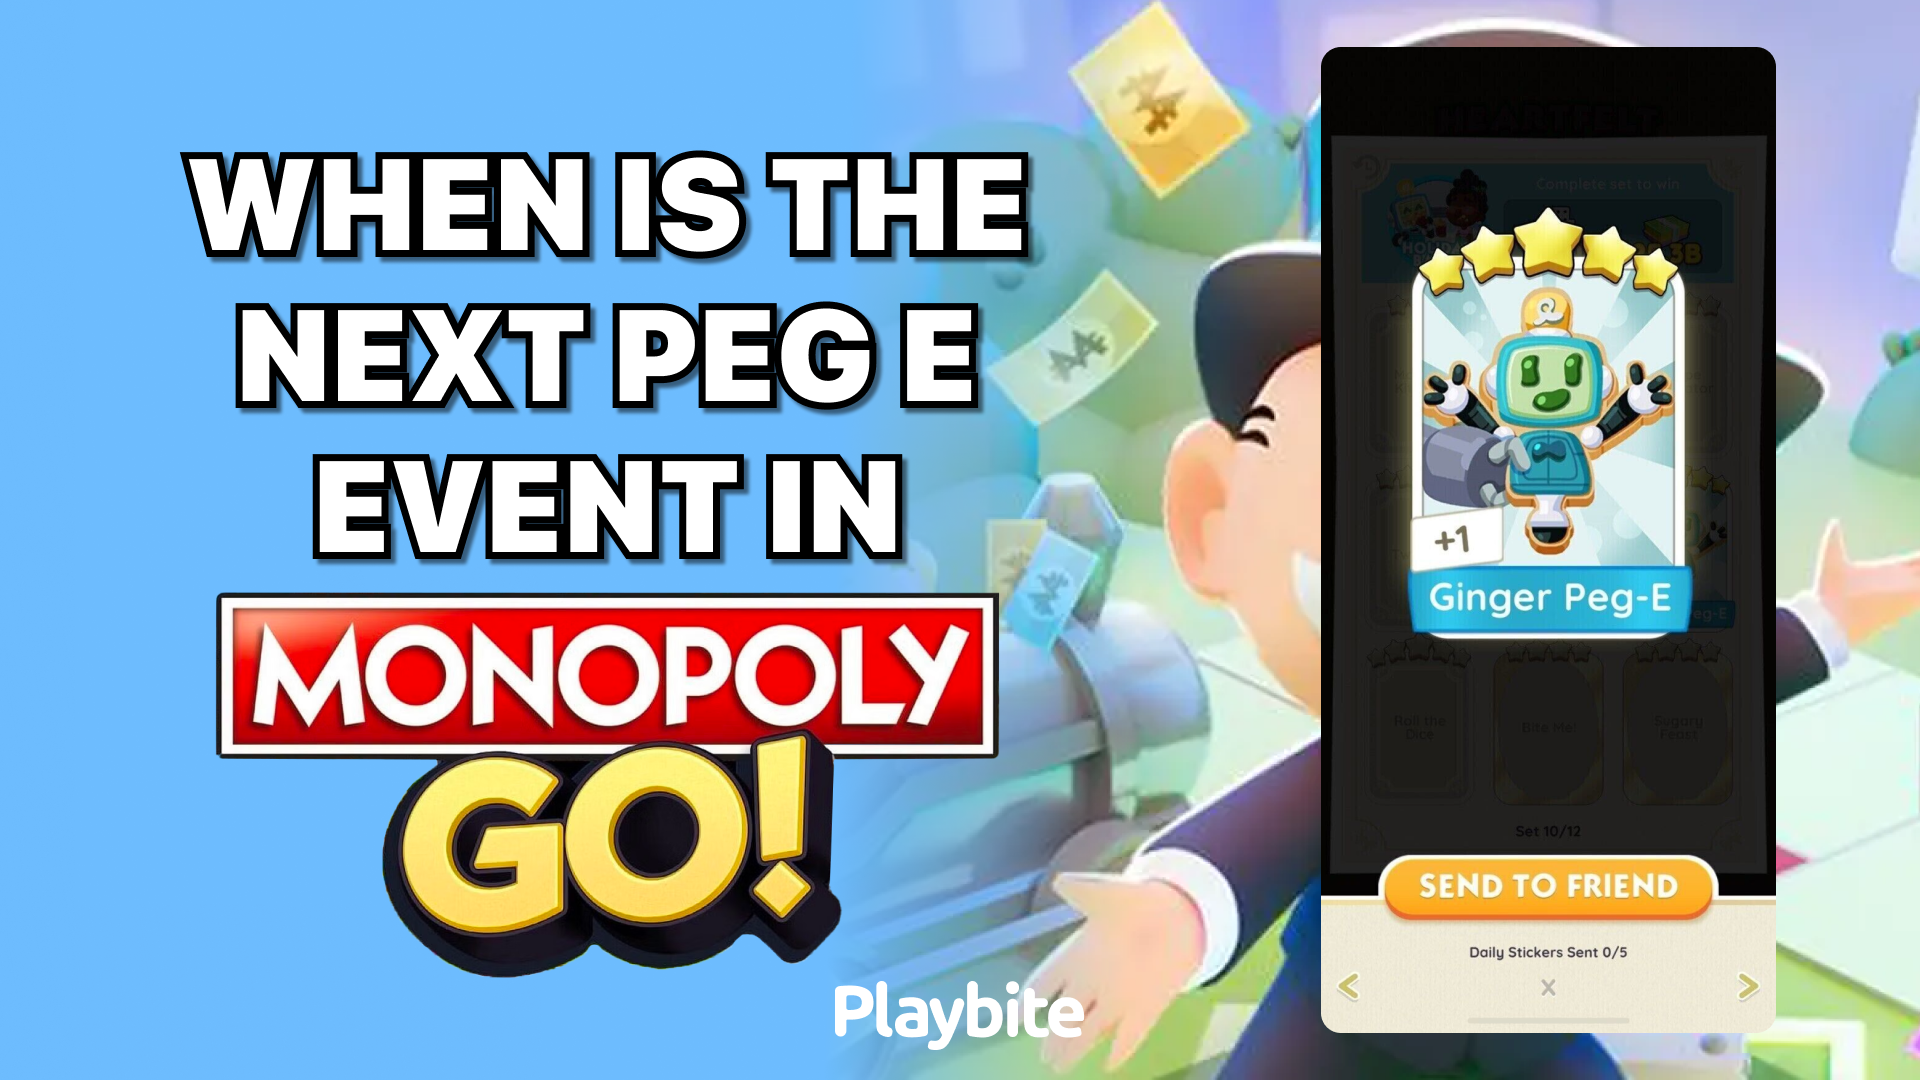 When Is the Next Peg E Event in Monopoly Go?